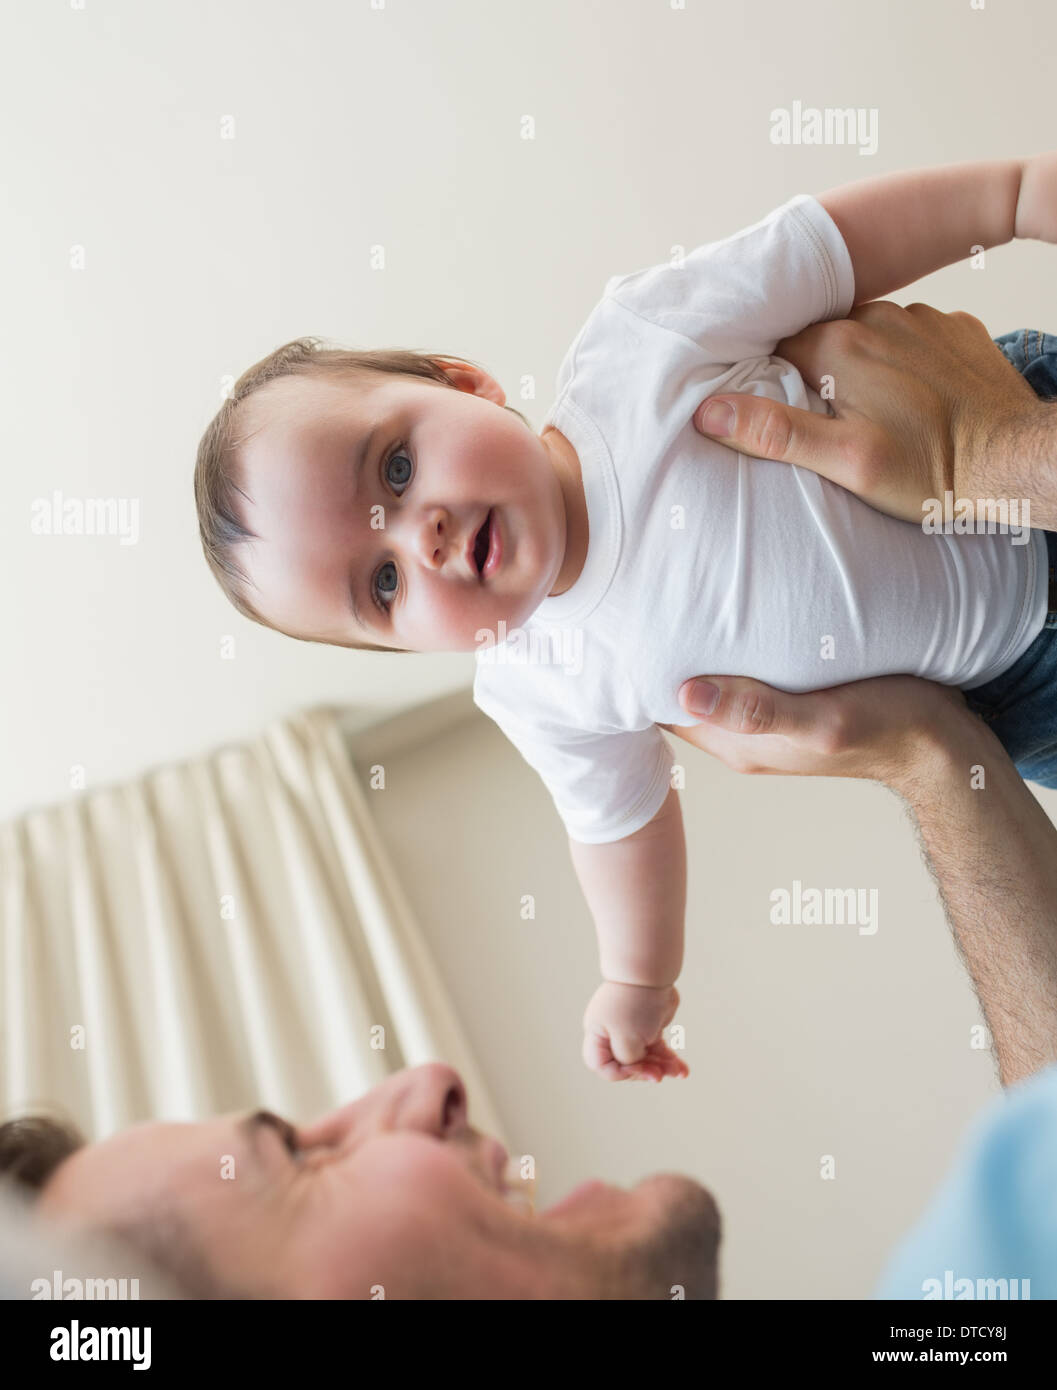 Adorable baby being carried by father Stock Photo